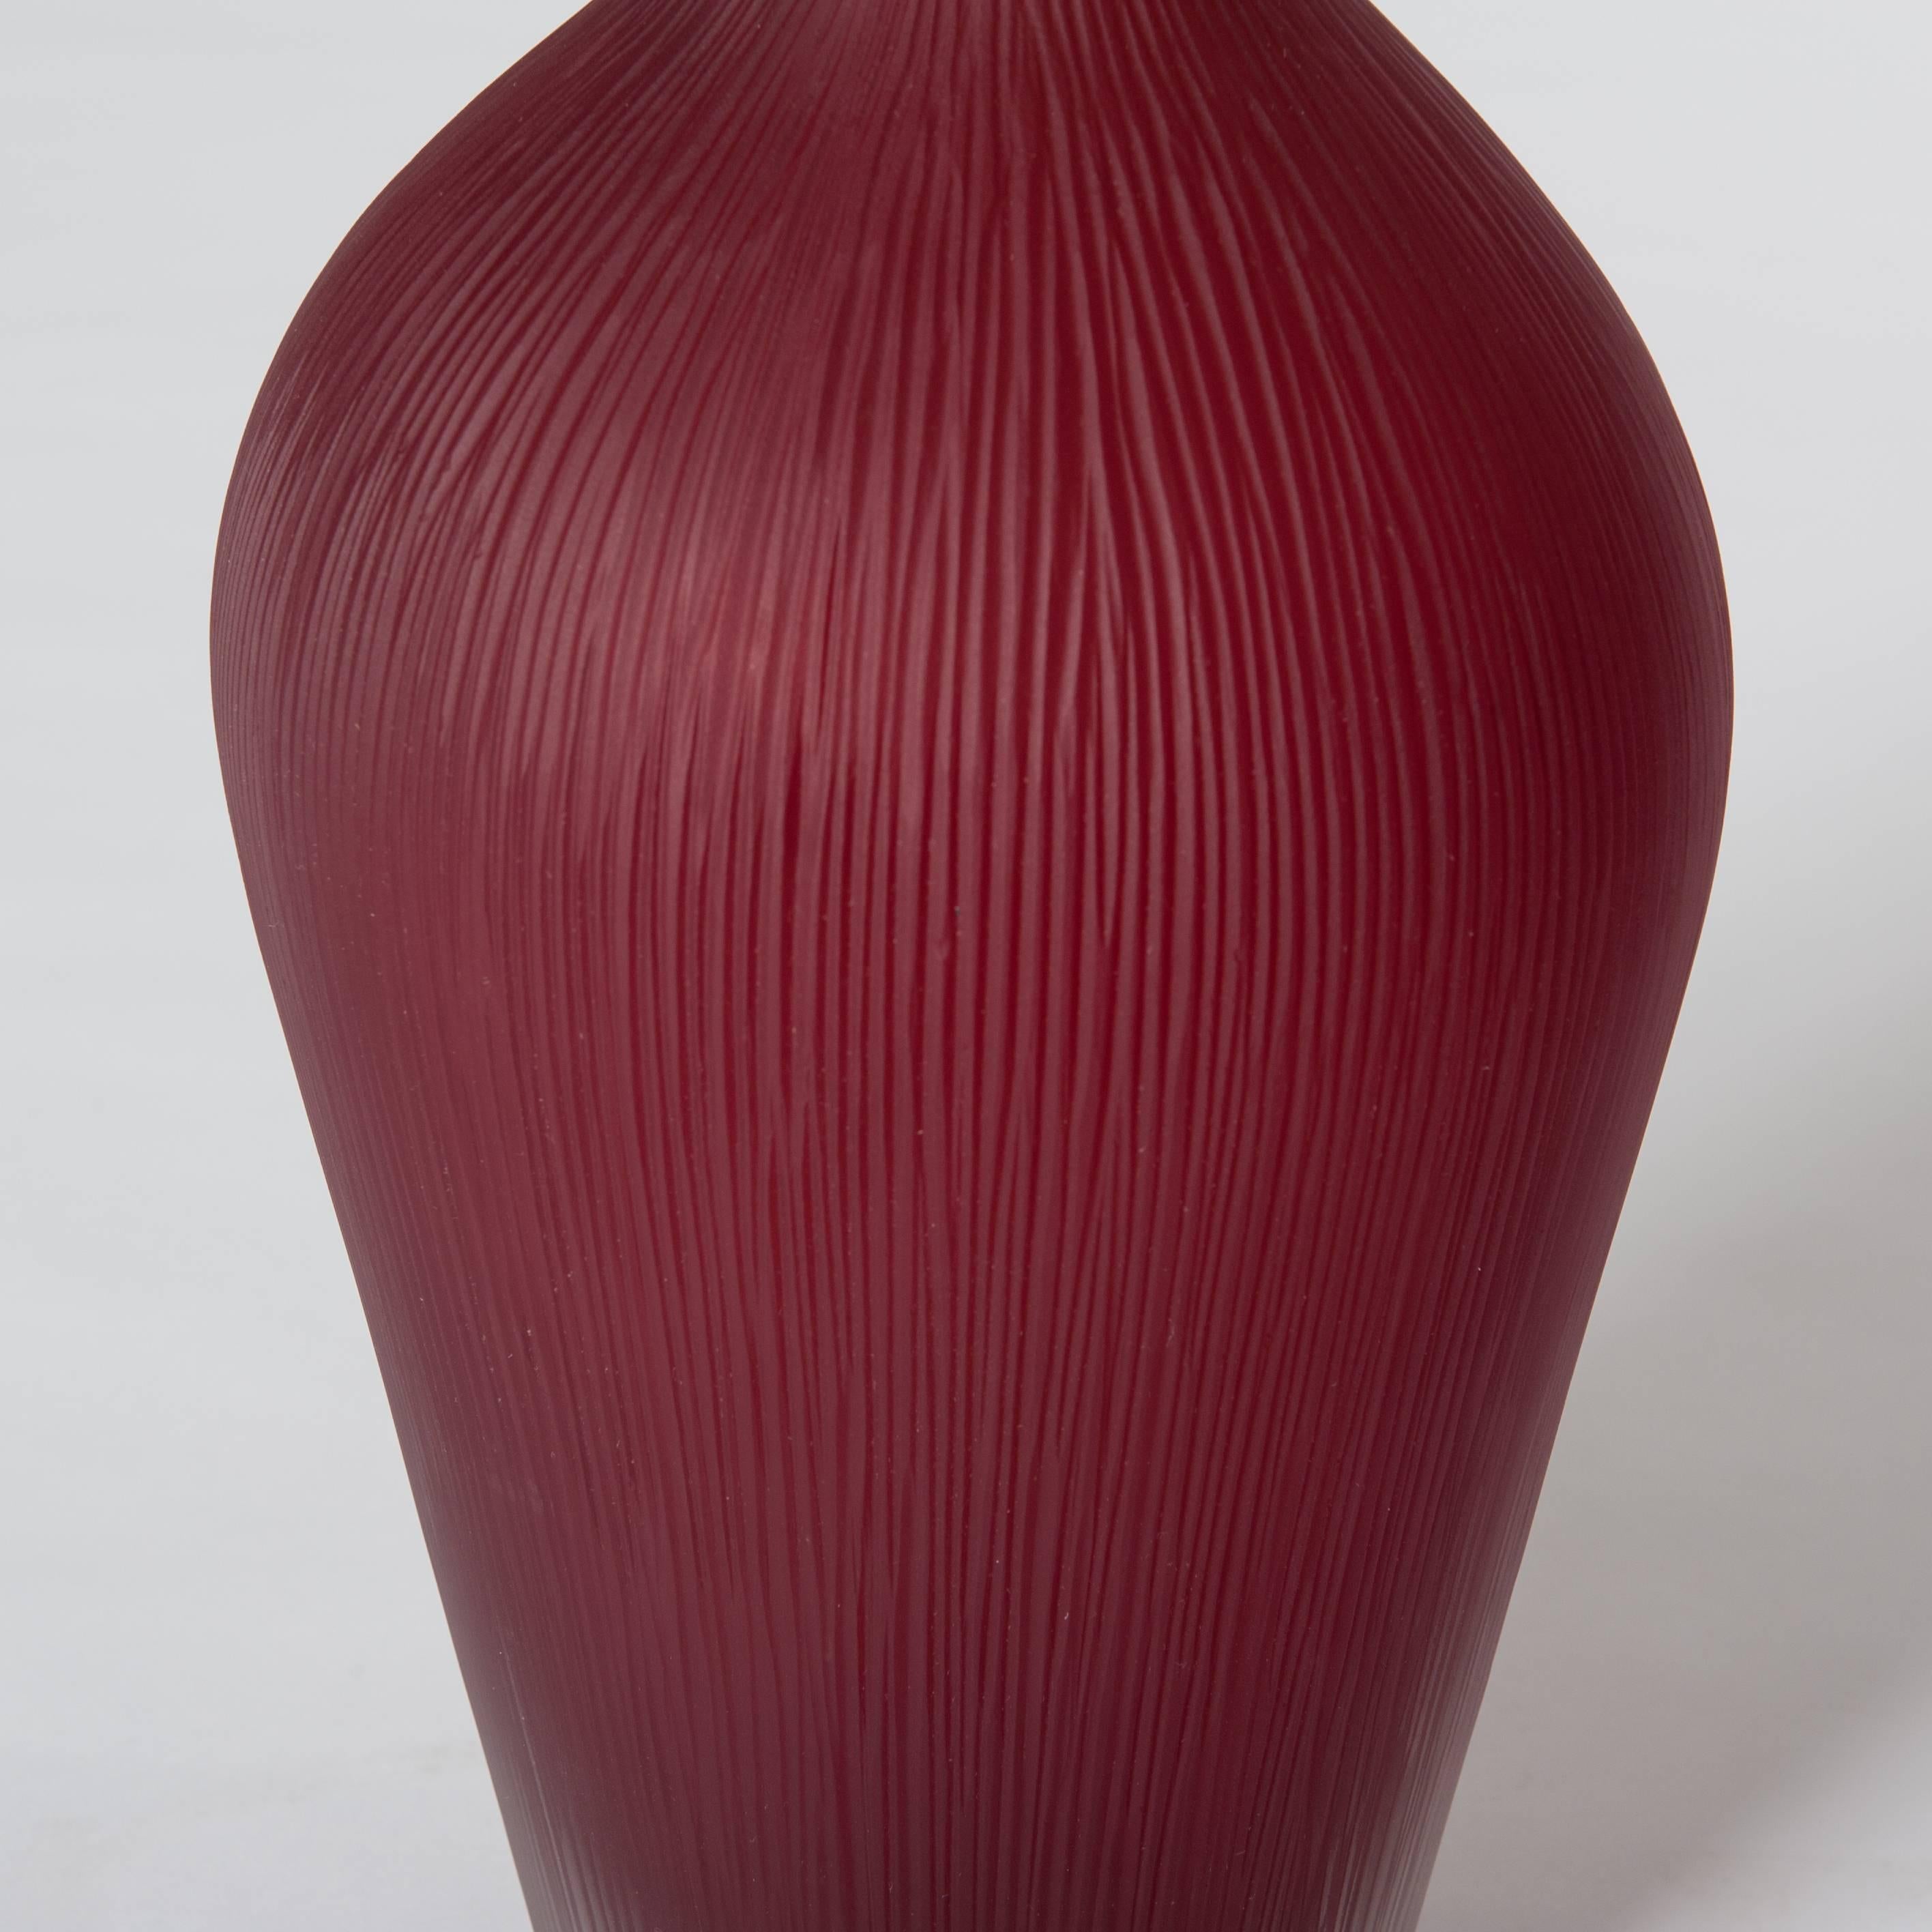 Unique Modern Italian Murano Glass Vase Deep Red Colored Sign by P. Signoretto In Good Condition For Sale In Salzburg, AT